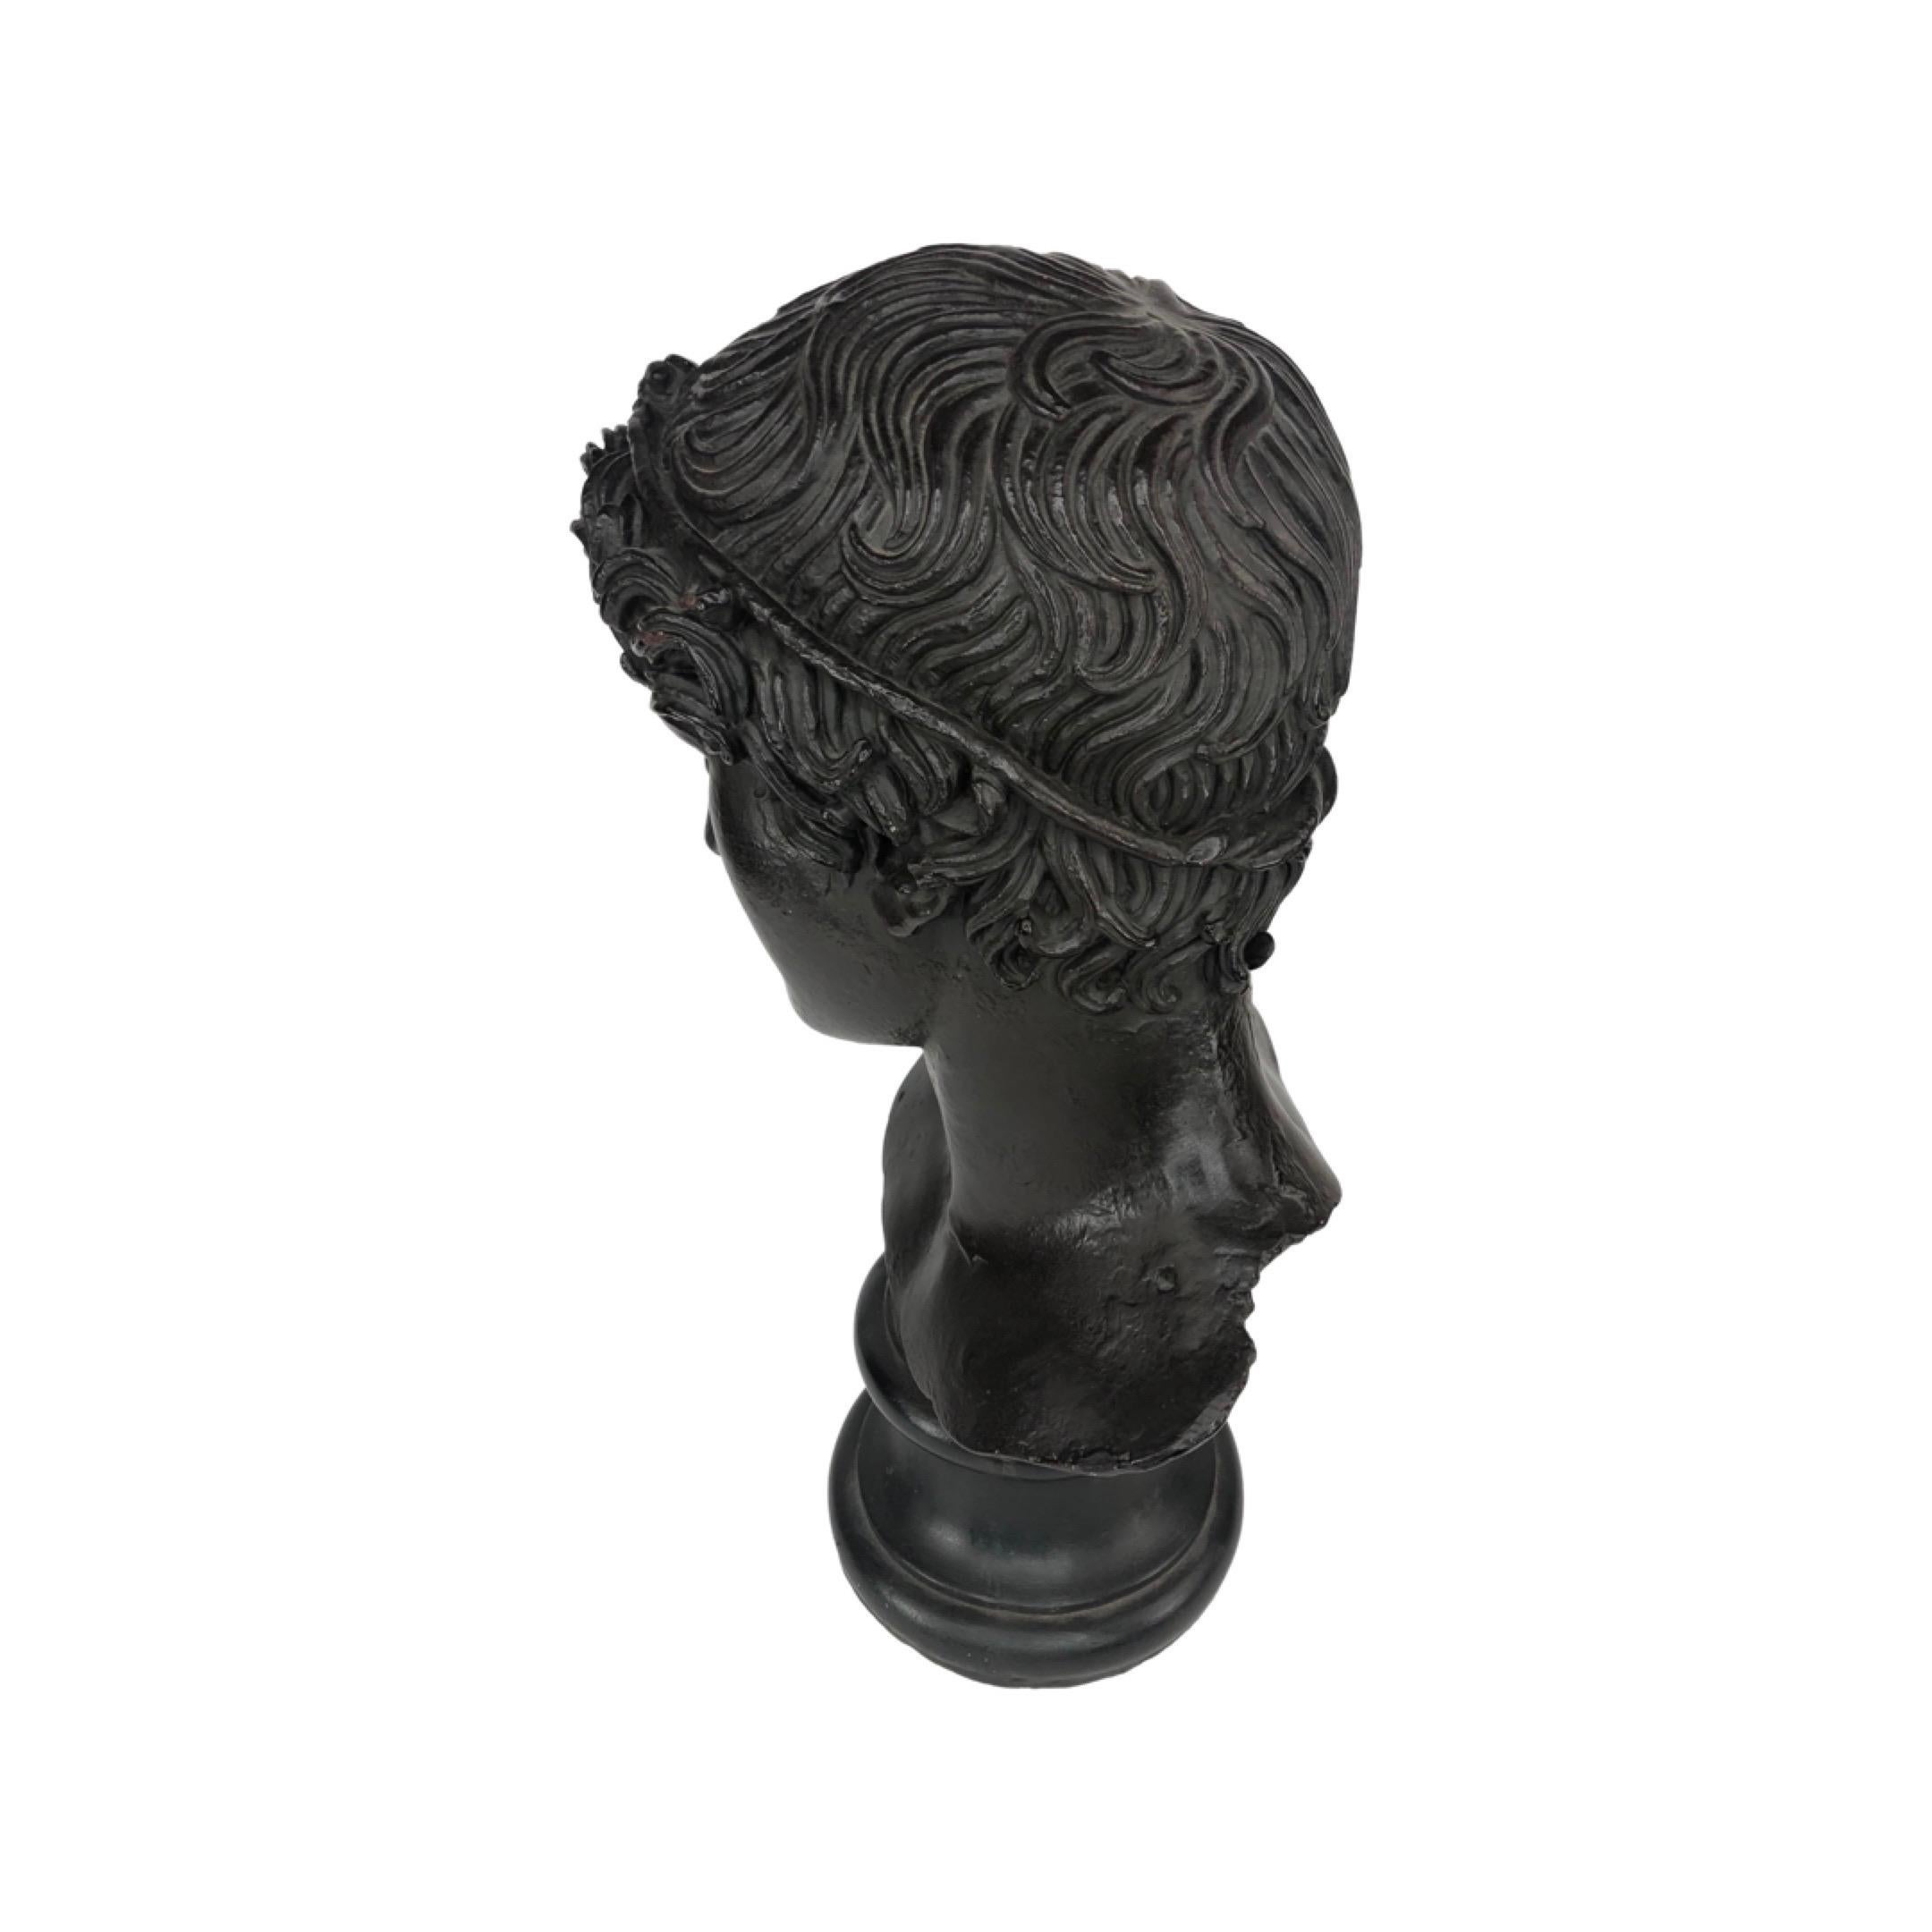 American Bust of De Benevent Head or Head of a Victorious Athlete by Austin Prod